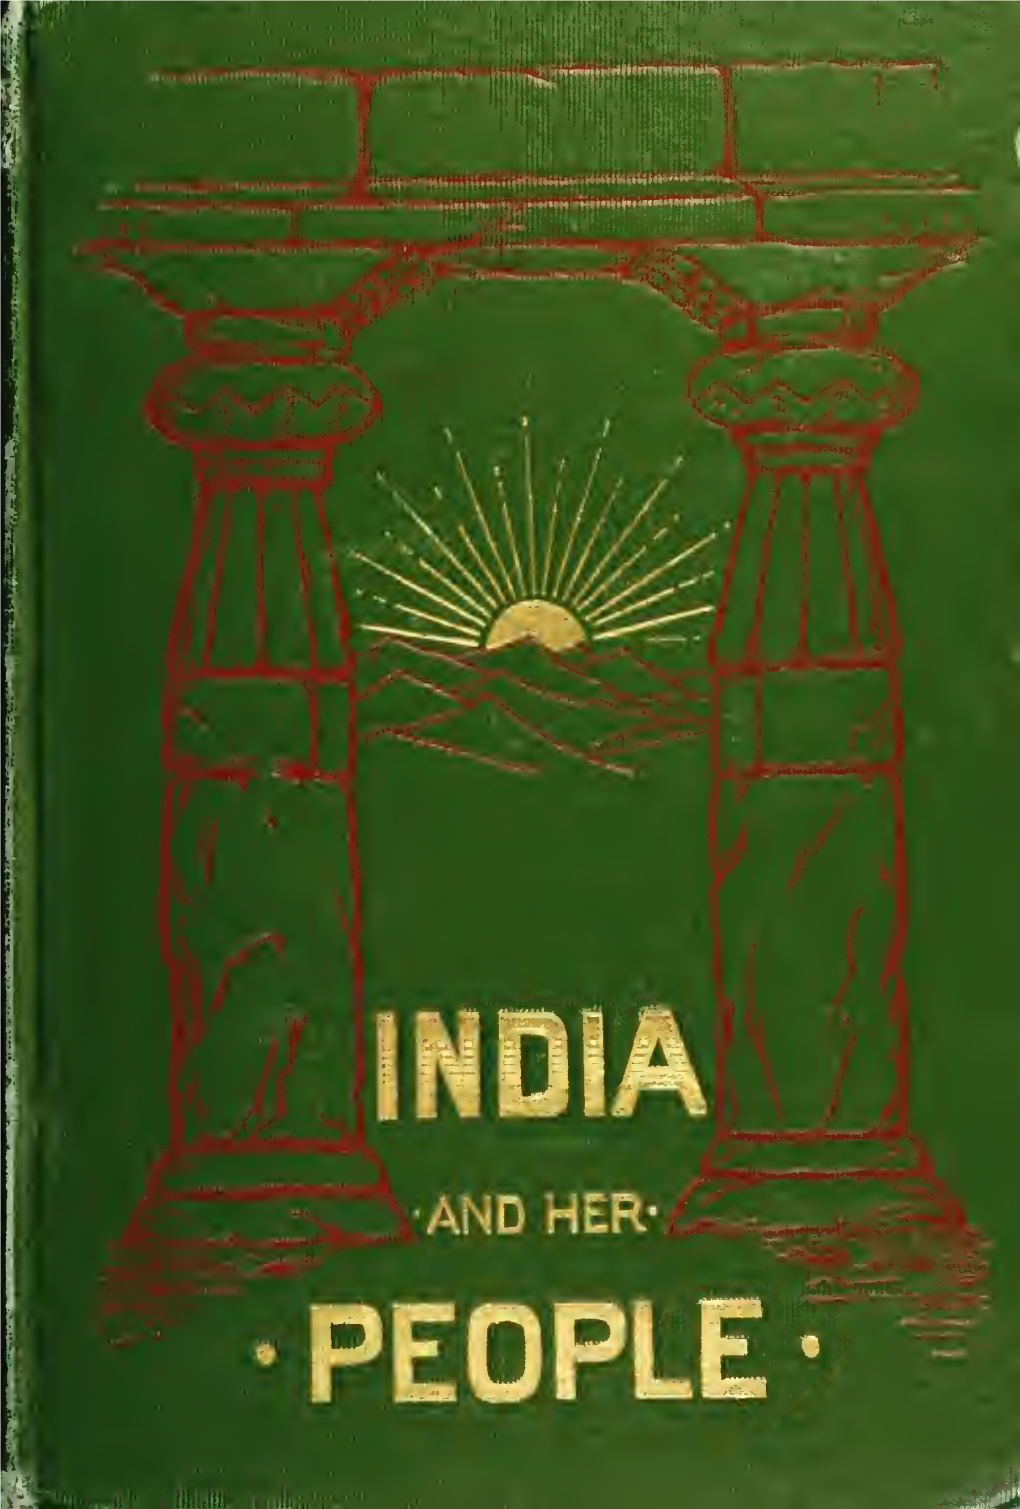 India and Her People